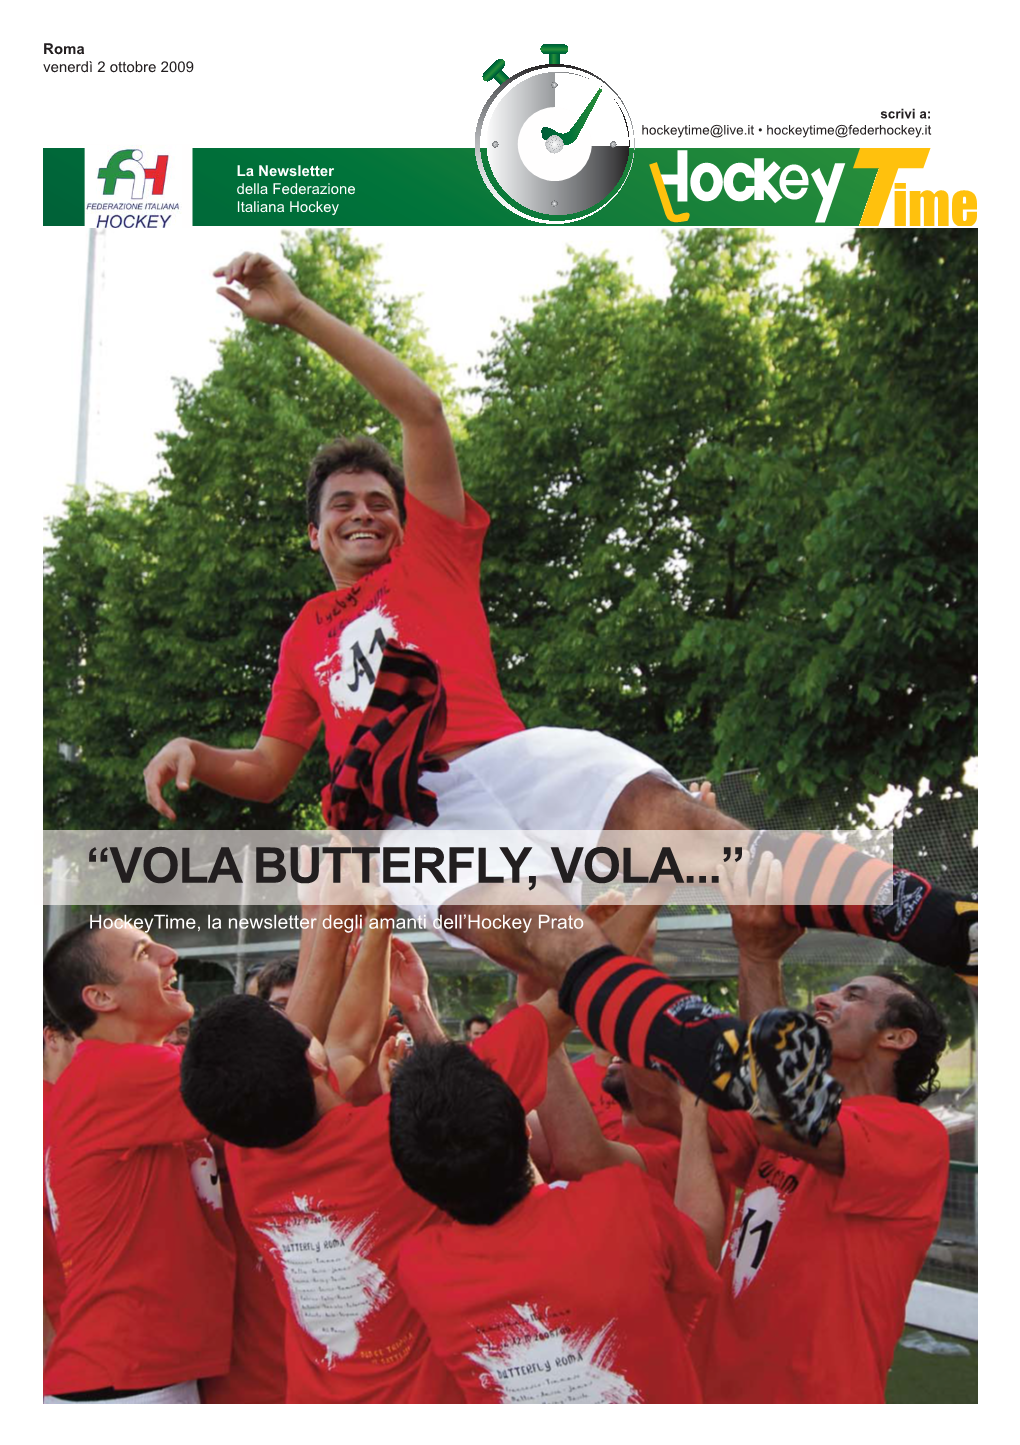 “Vola Butterfly, Vola...”